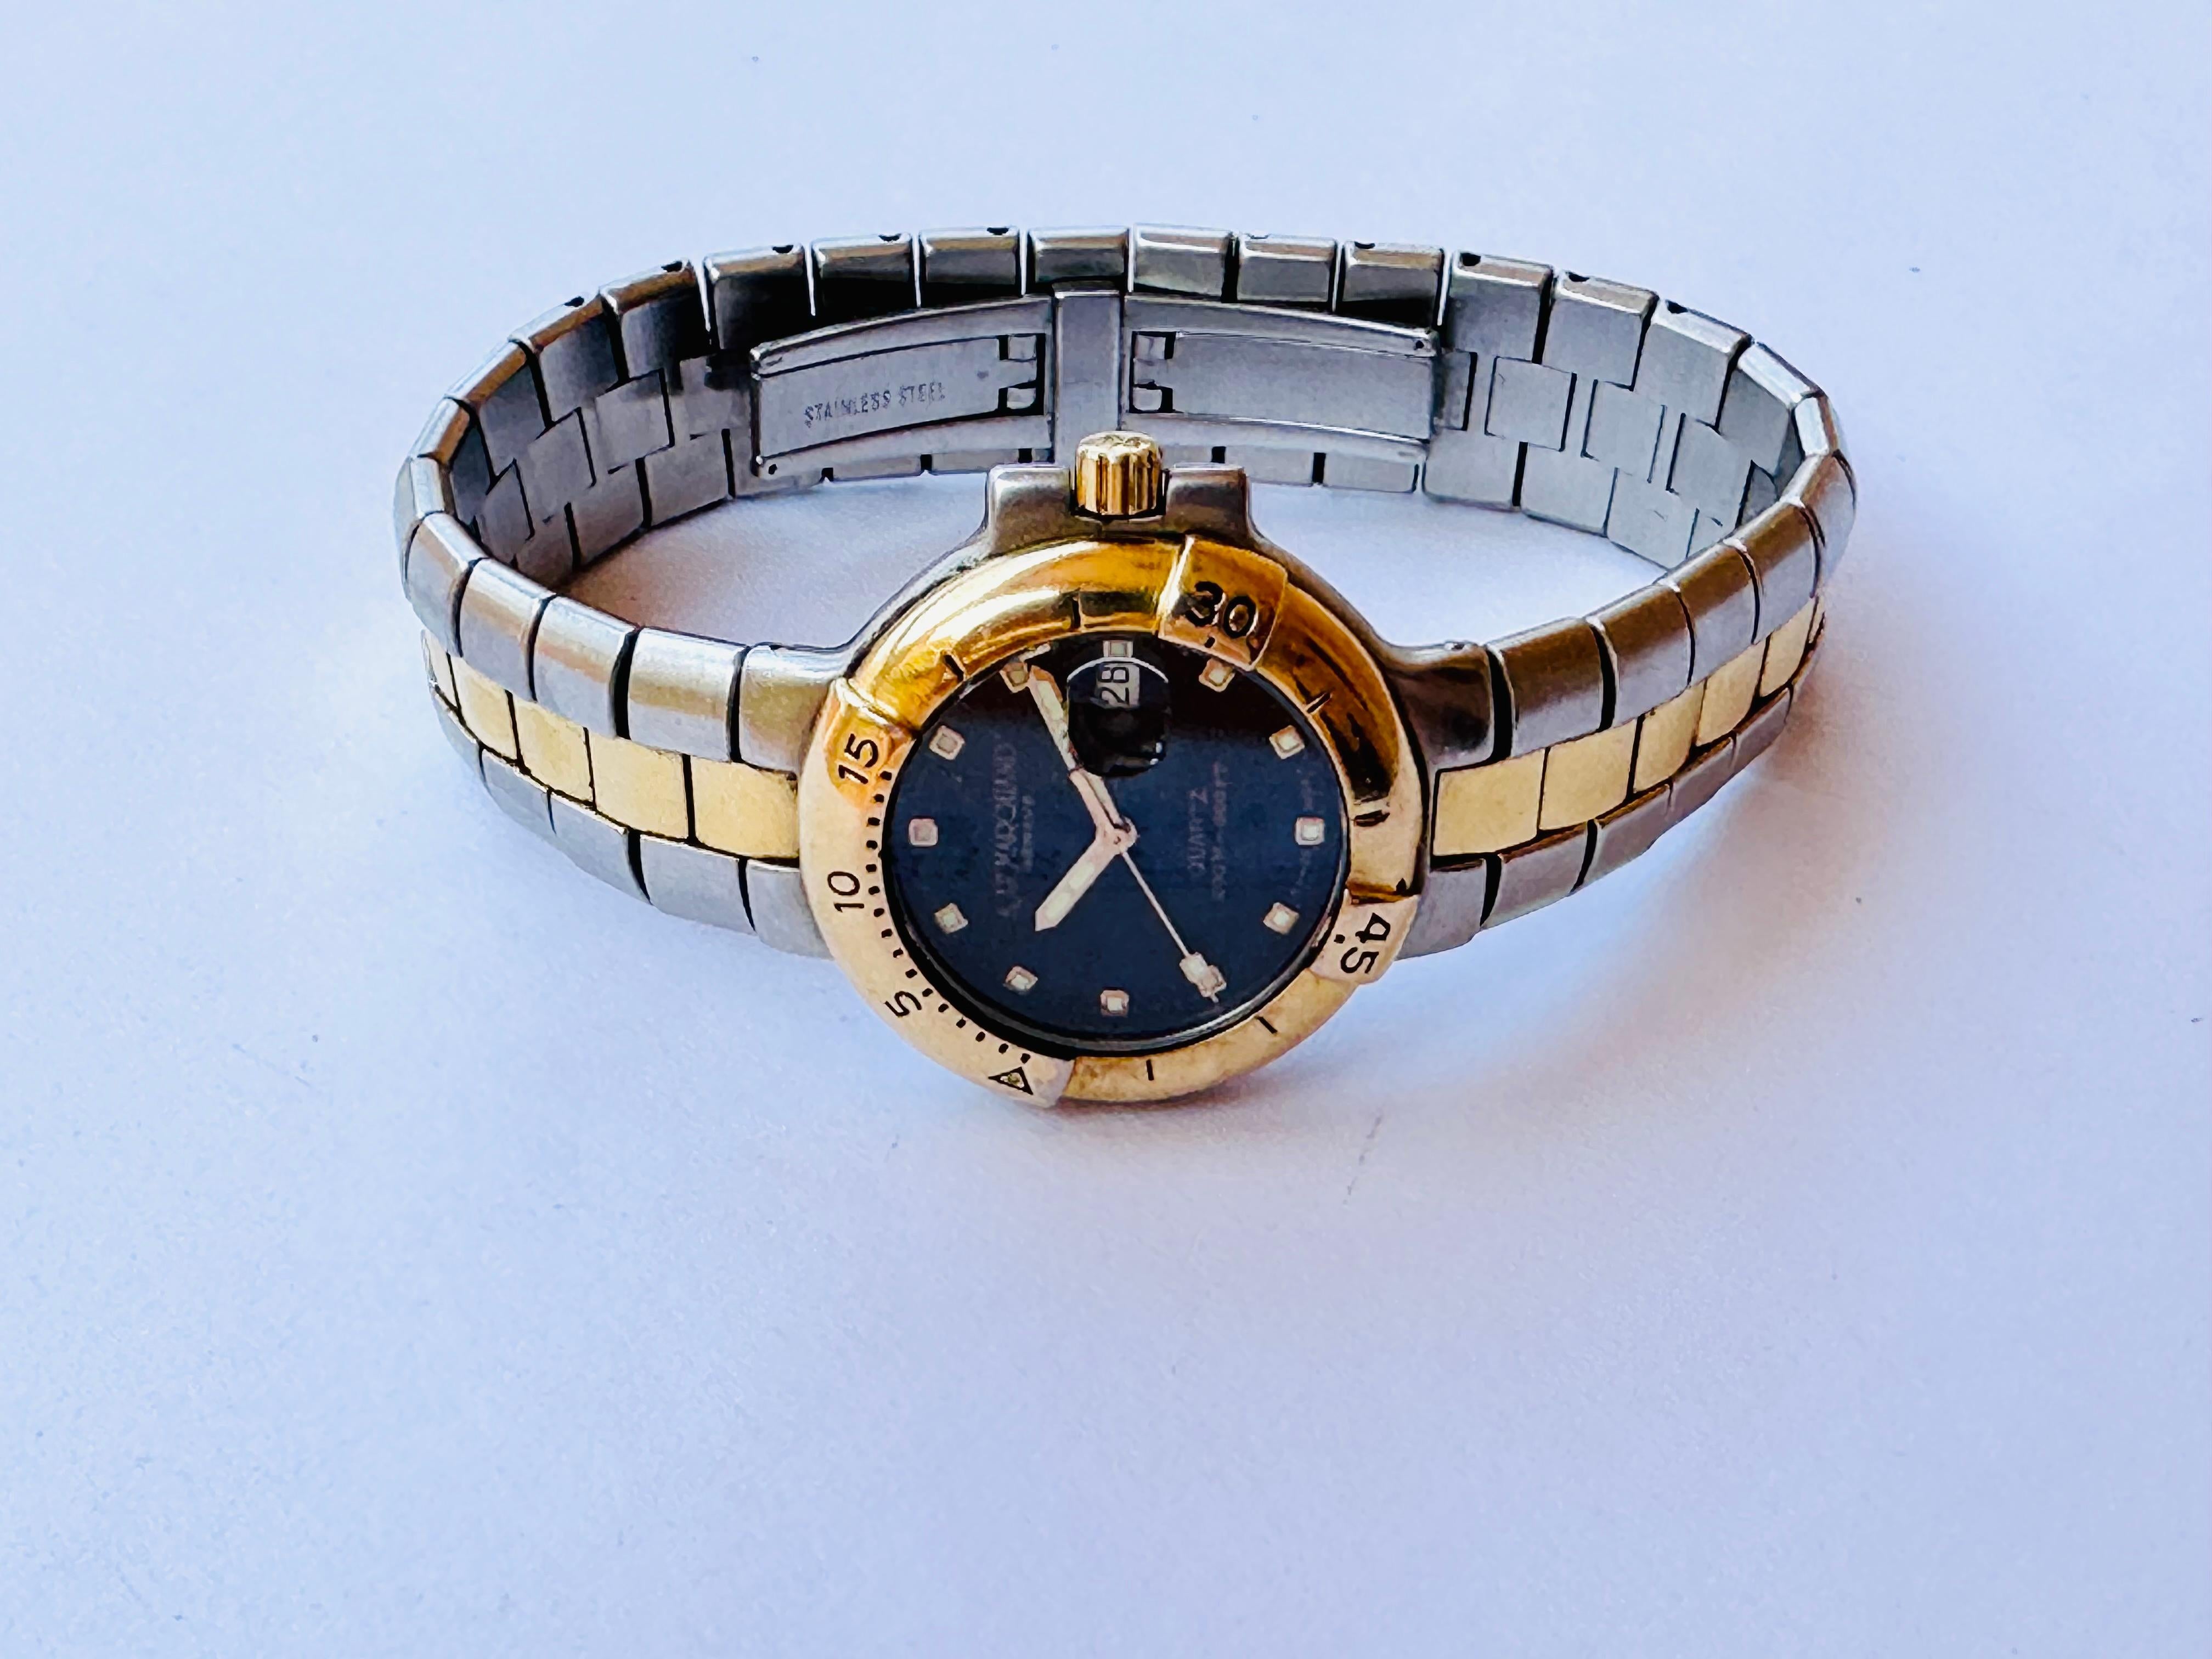 Brand: ALE MARQUAND

Model: Geneve

Reference Number: 600 4 936

Country Of Manufacture: Switzerland

Movement: Quartz

Case Material: Gold Plated Stainless steel

Measurements : Case width: 30 mm. (without crown)

Band Type : Gold Plated &